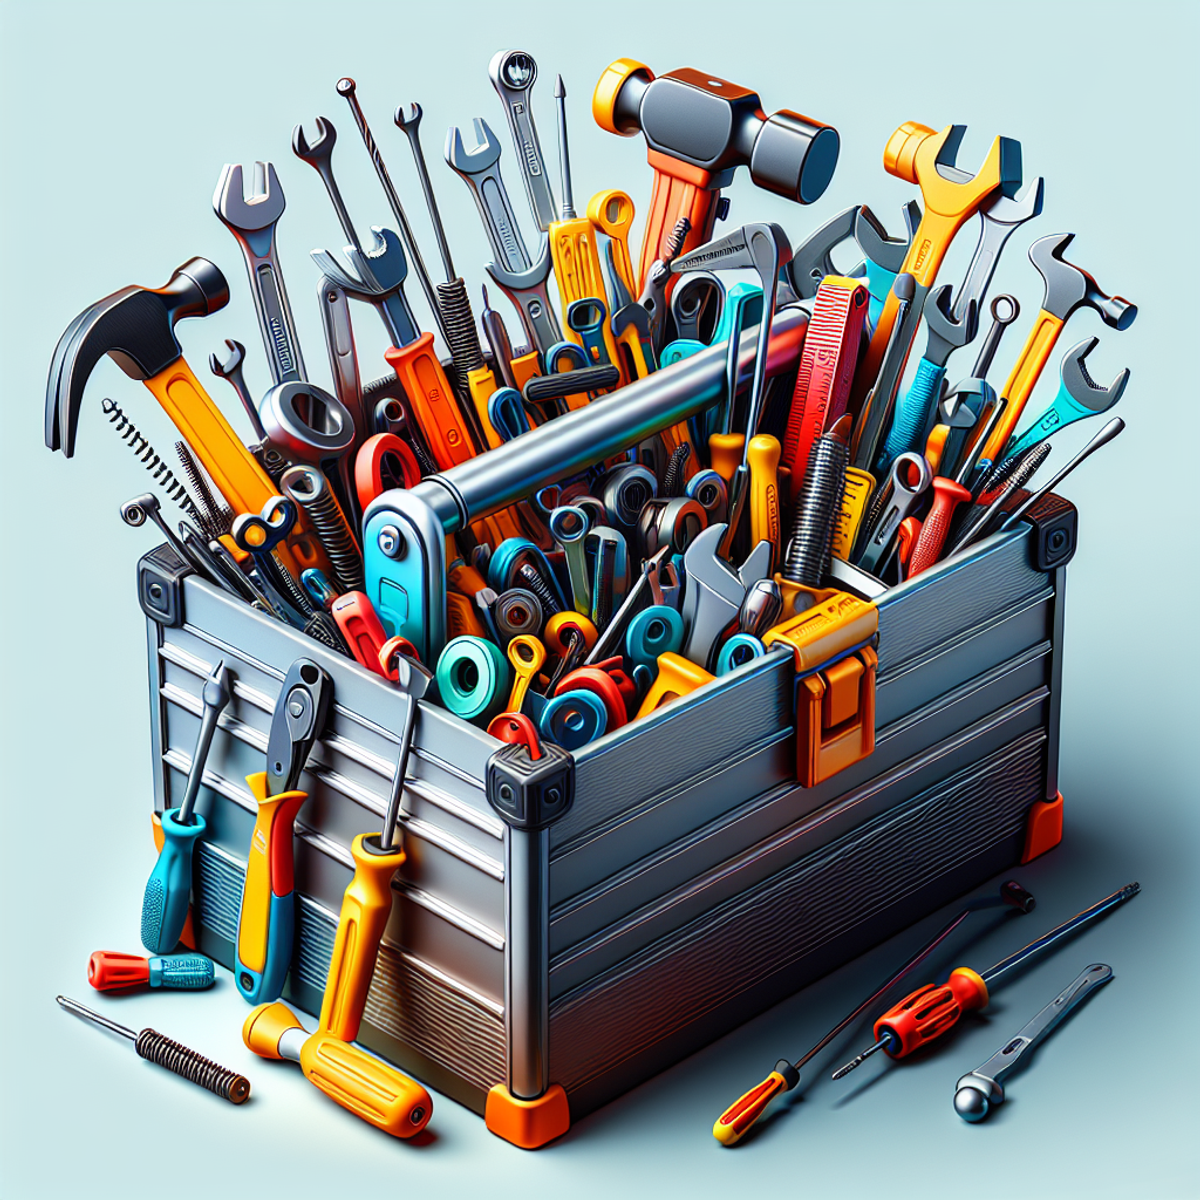 A toolbox filled with colorful, diverse tools symbolizing the wide range of functionalities and customization possibilities provided by digital plugins.